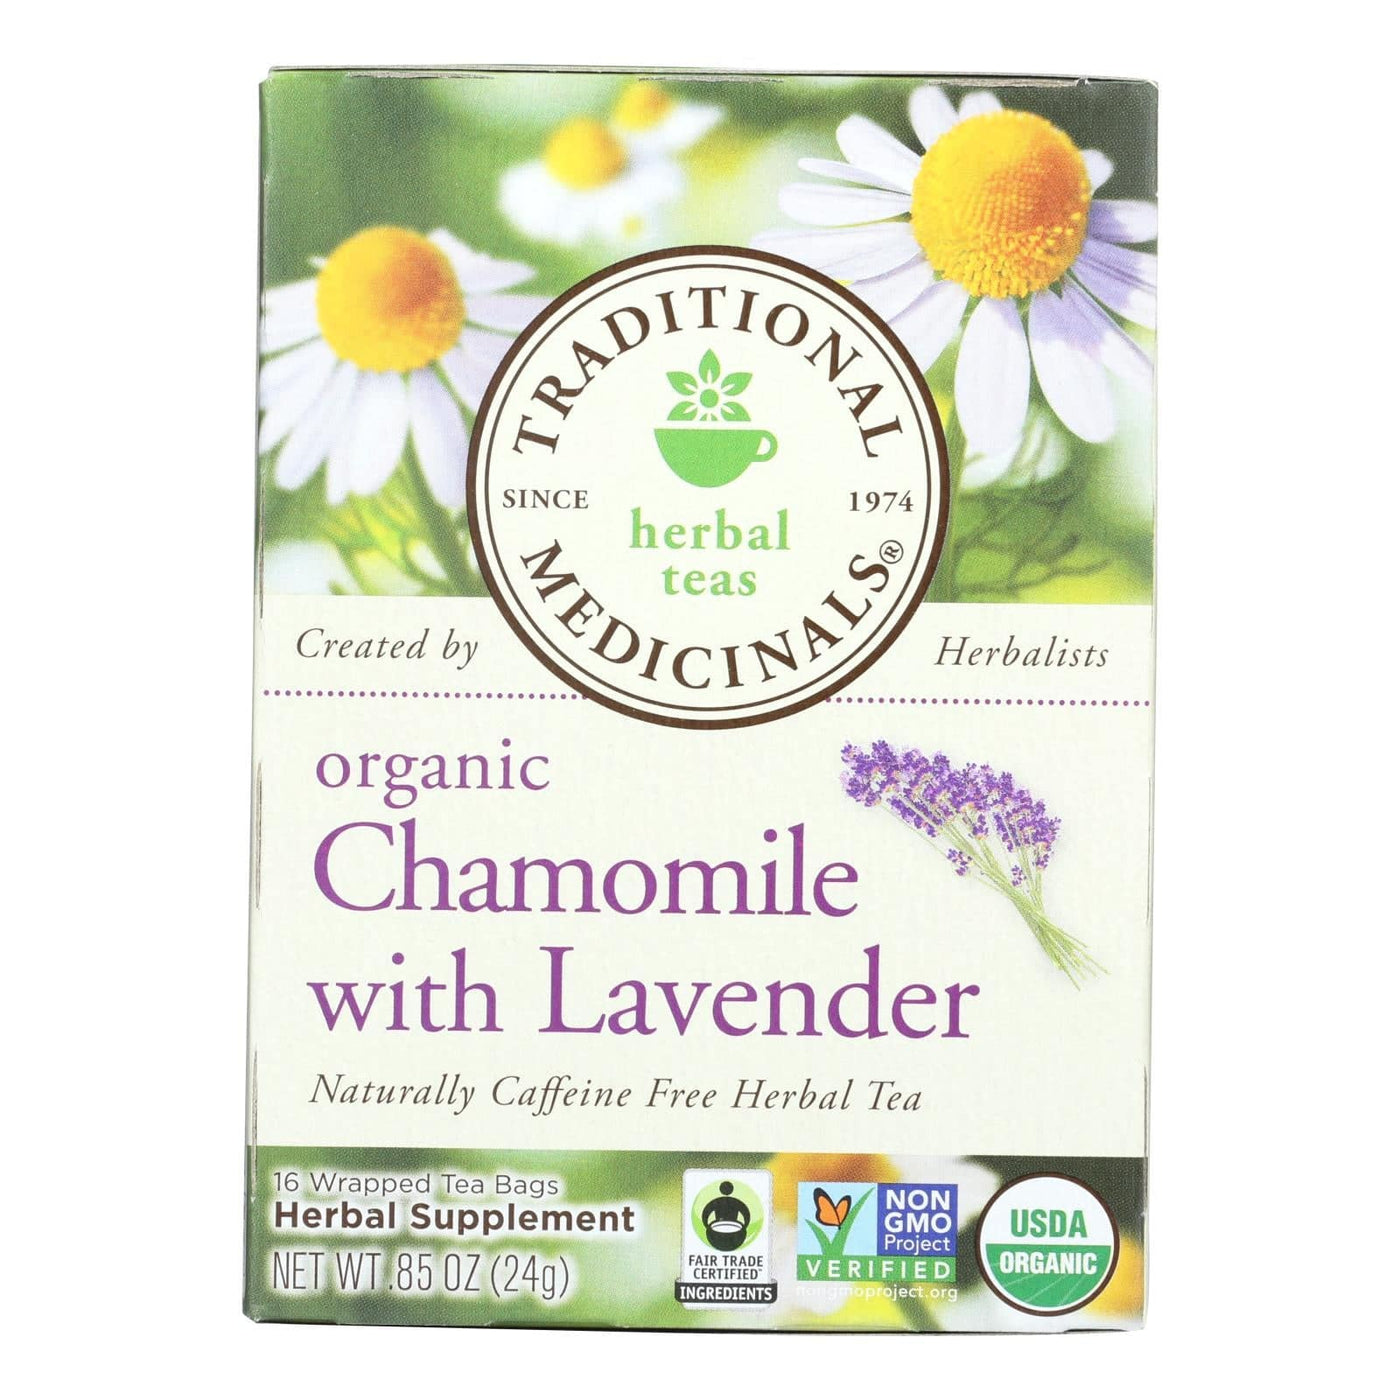 Traditional Medicinals Organic Chamomile With Lavender Herbal Tea - Caffeine Free - Case Of 6 - 16 Bags | OnlyNaturals.us